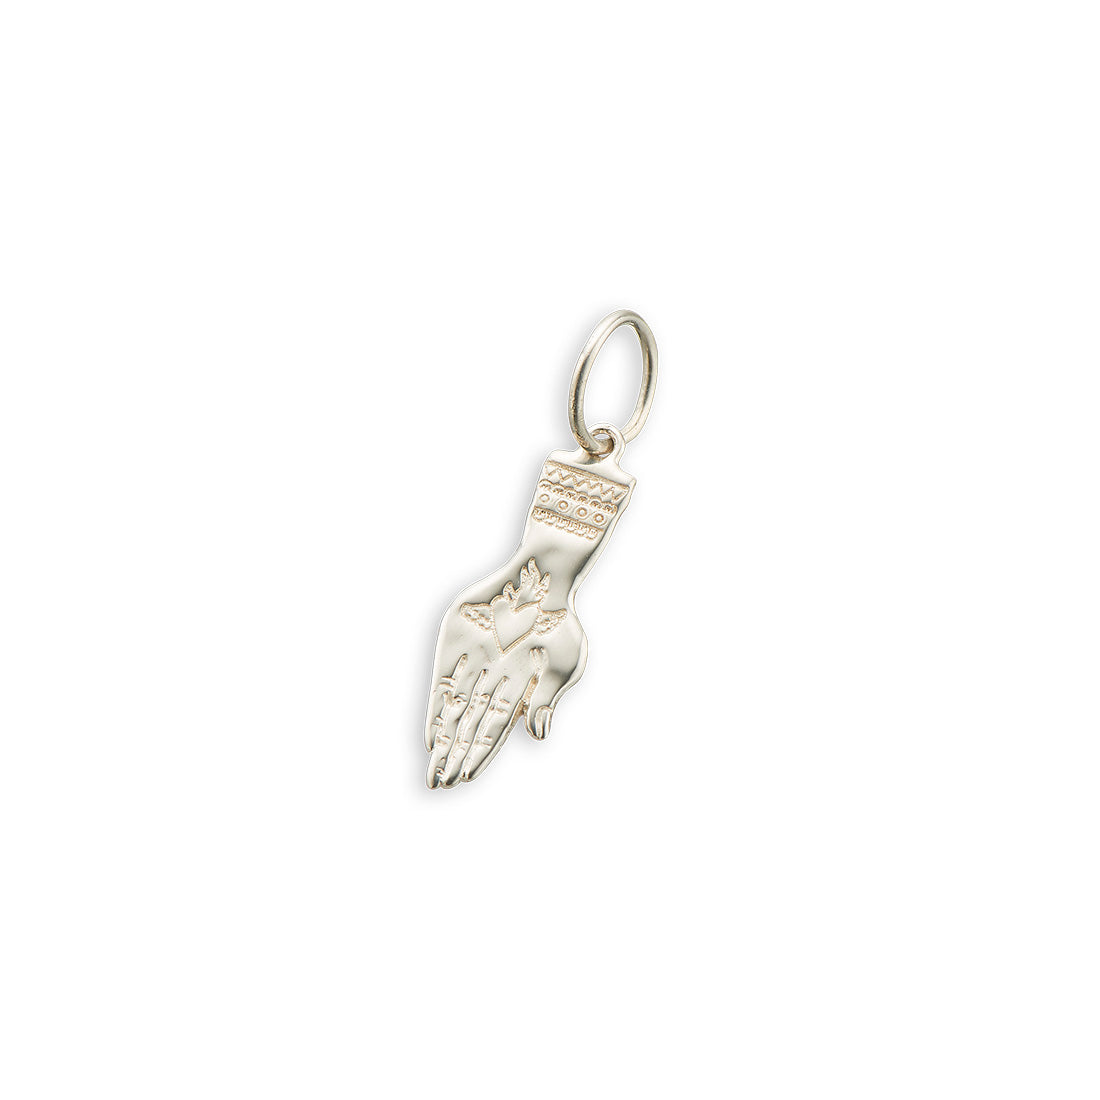 Hand of love and protection charm